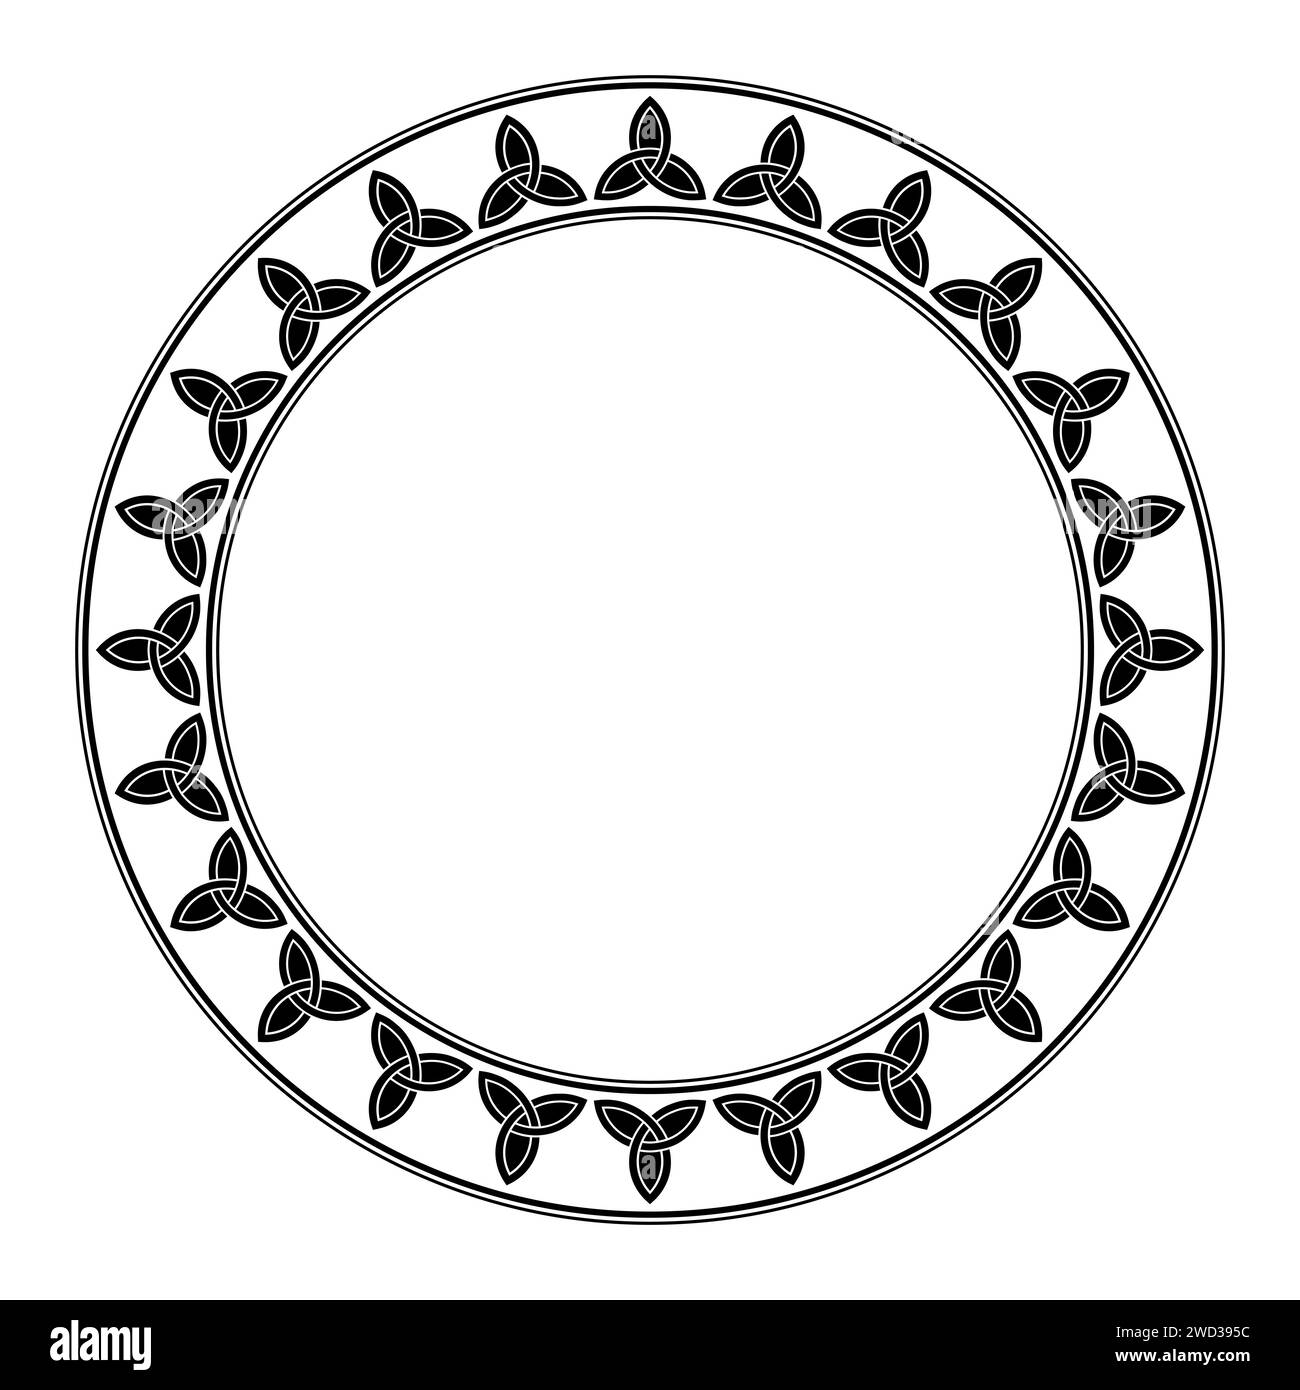 Circle frame with Celtic triquetra pattern. Decorative border with the emblem of the Holy Trinity, formed by interlacing arcs or portions of circles. Stock Photo